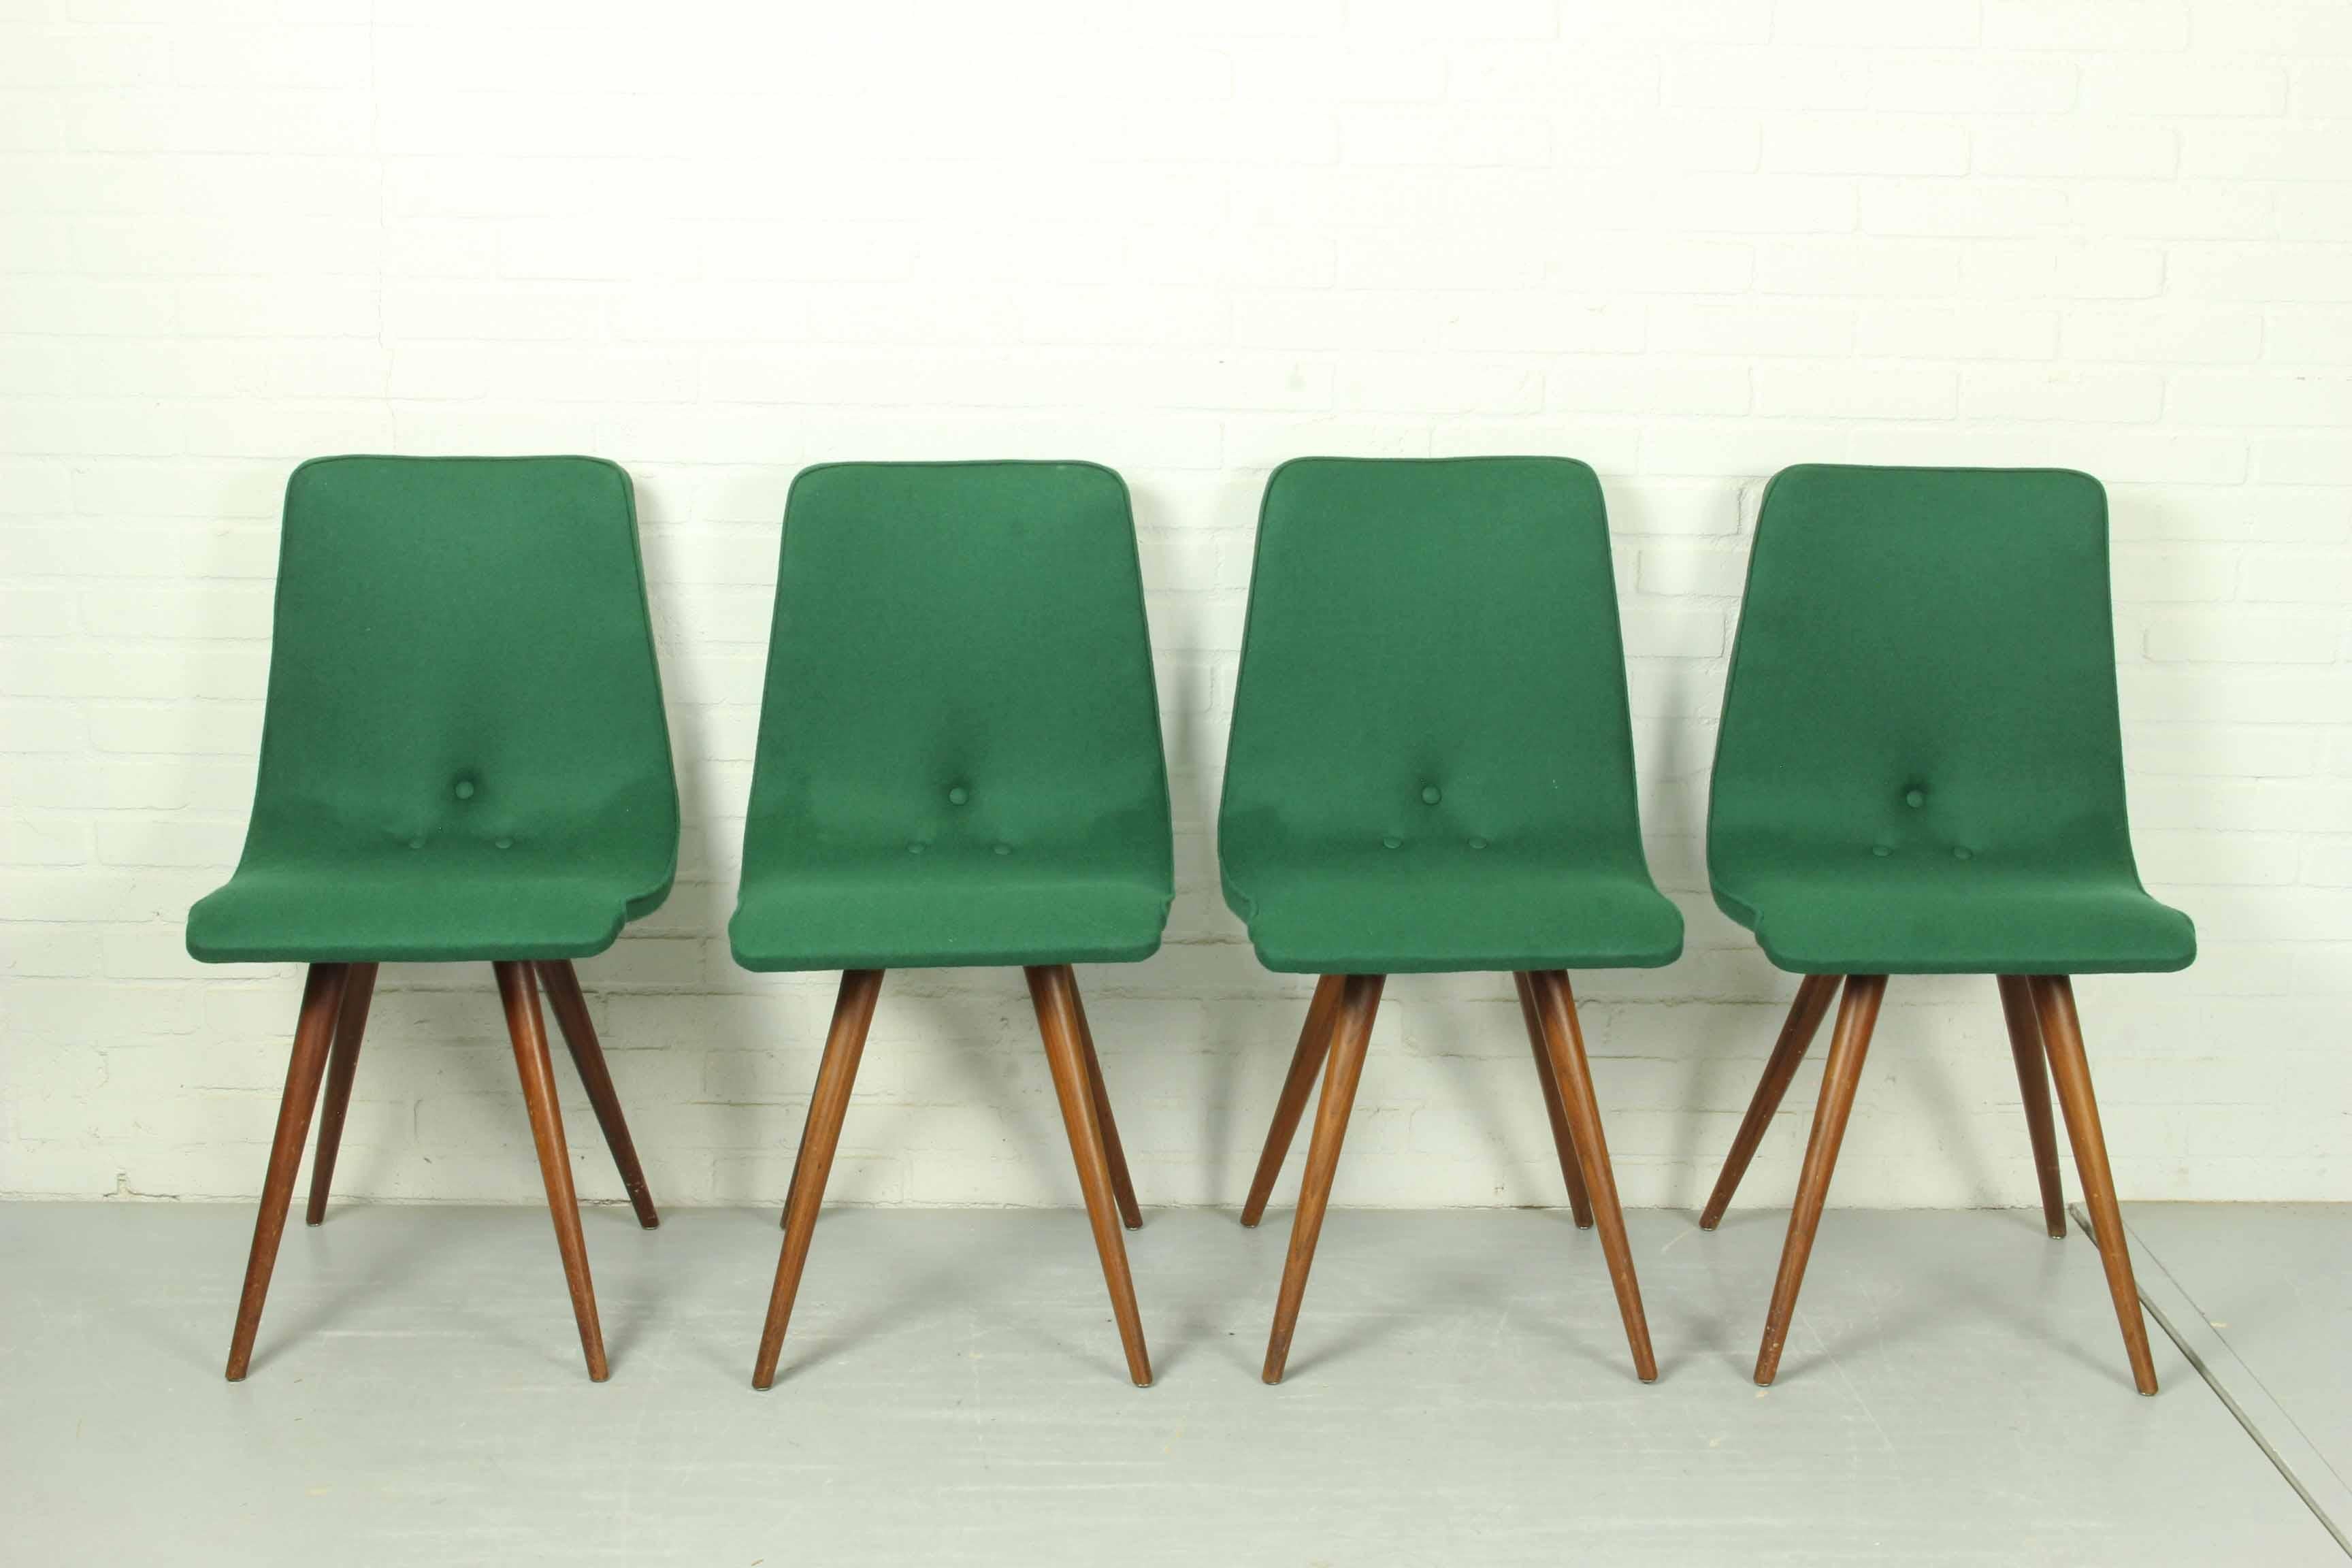 Set of 4 Teak Dining Chairs by Van Os, 1950s For Sale 1